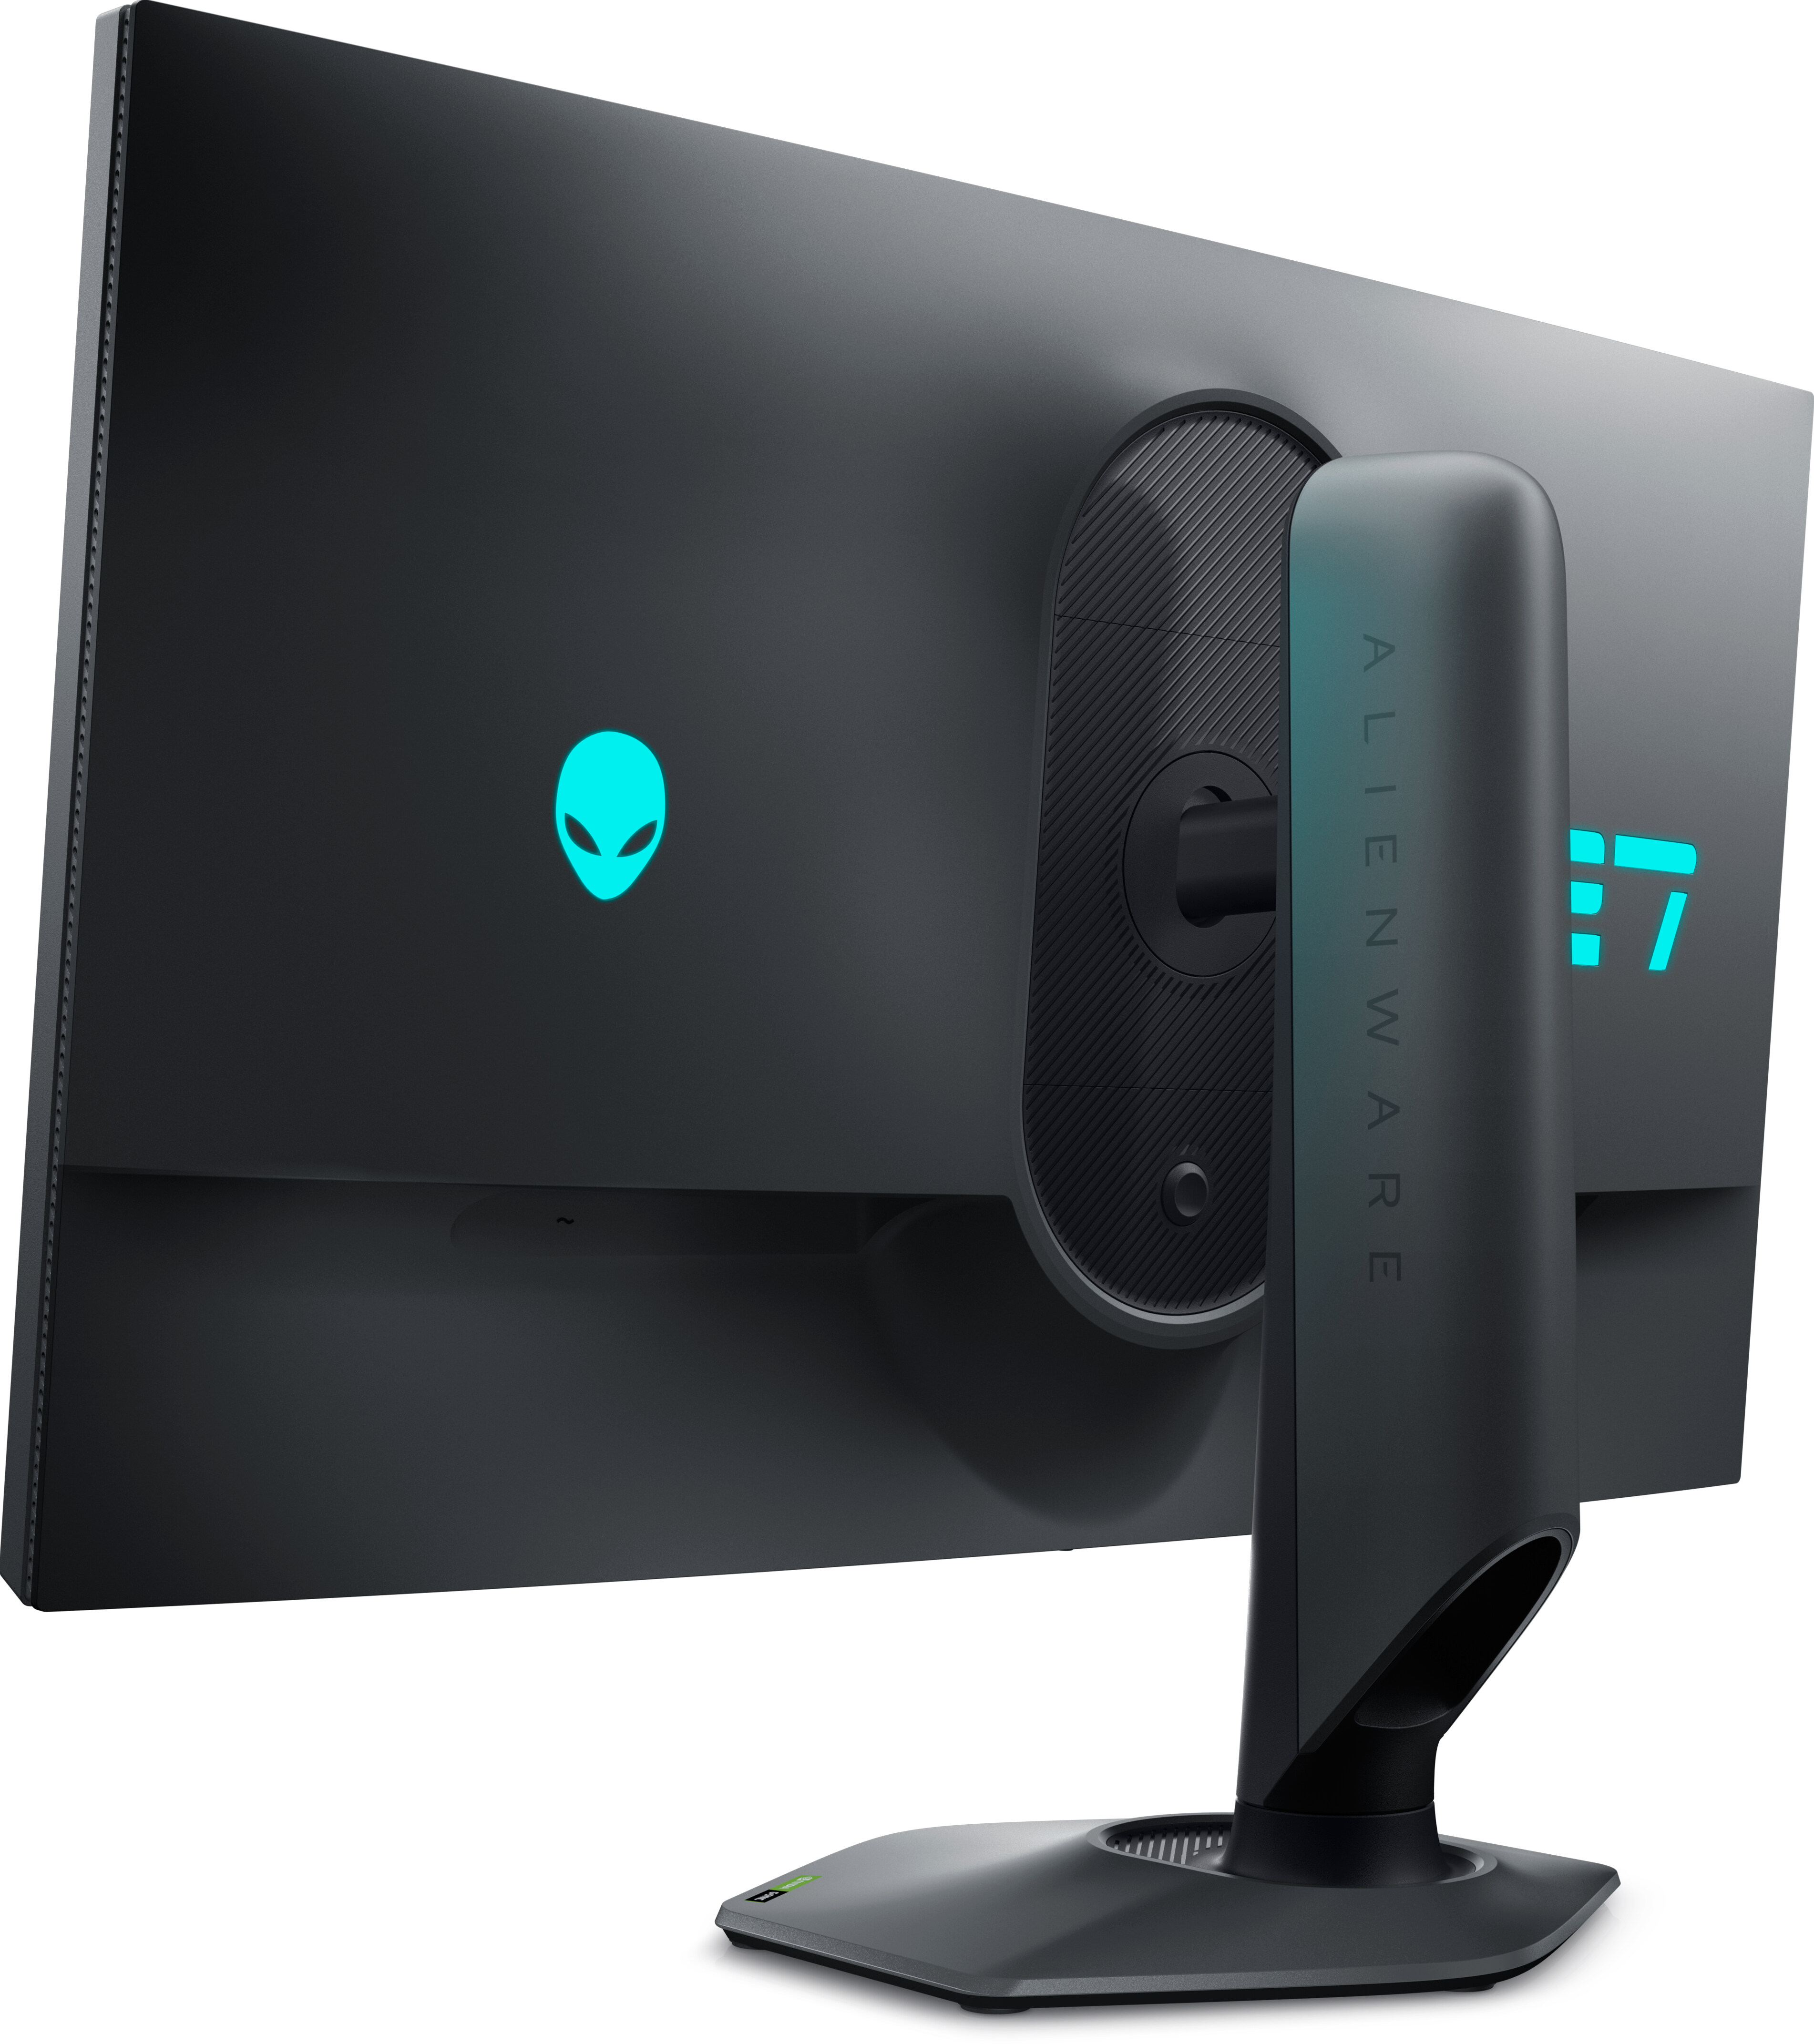 https://i.dell.com/is/image/DellContent/content/dam/ss2/product-images/dell-client-products/peripherals/monitors/alienware/aw2724dm/media-gallery/monitor-alienware-aw2724dm-black-gallery-10.psd?fmt=pjpg&pscan=auto&scl=1&wid=3805&hei=4288&qlt=100,1&resMode=sharp2&size=3805,4288&chrss=full&imwidth=5000